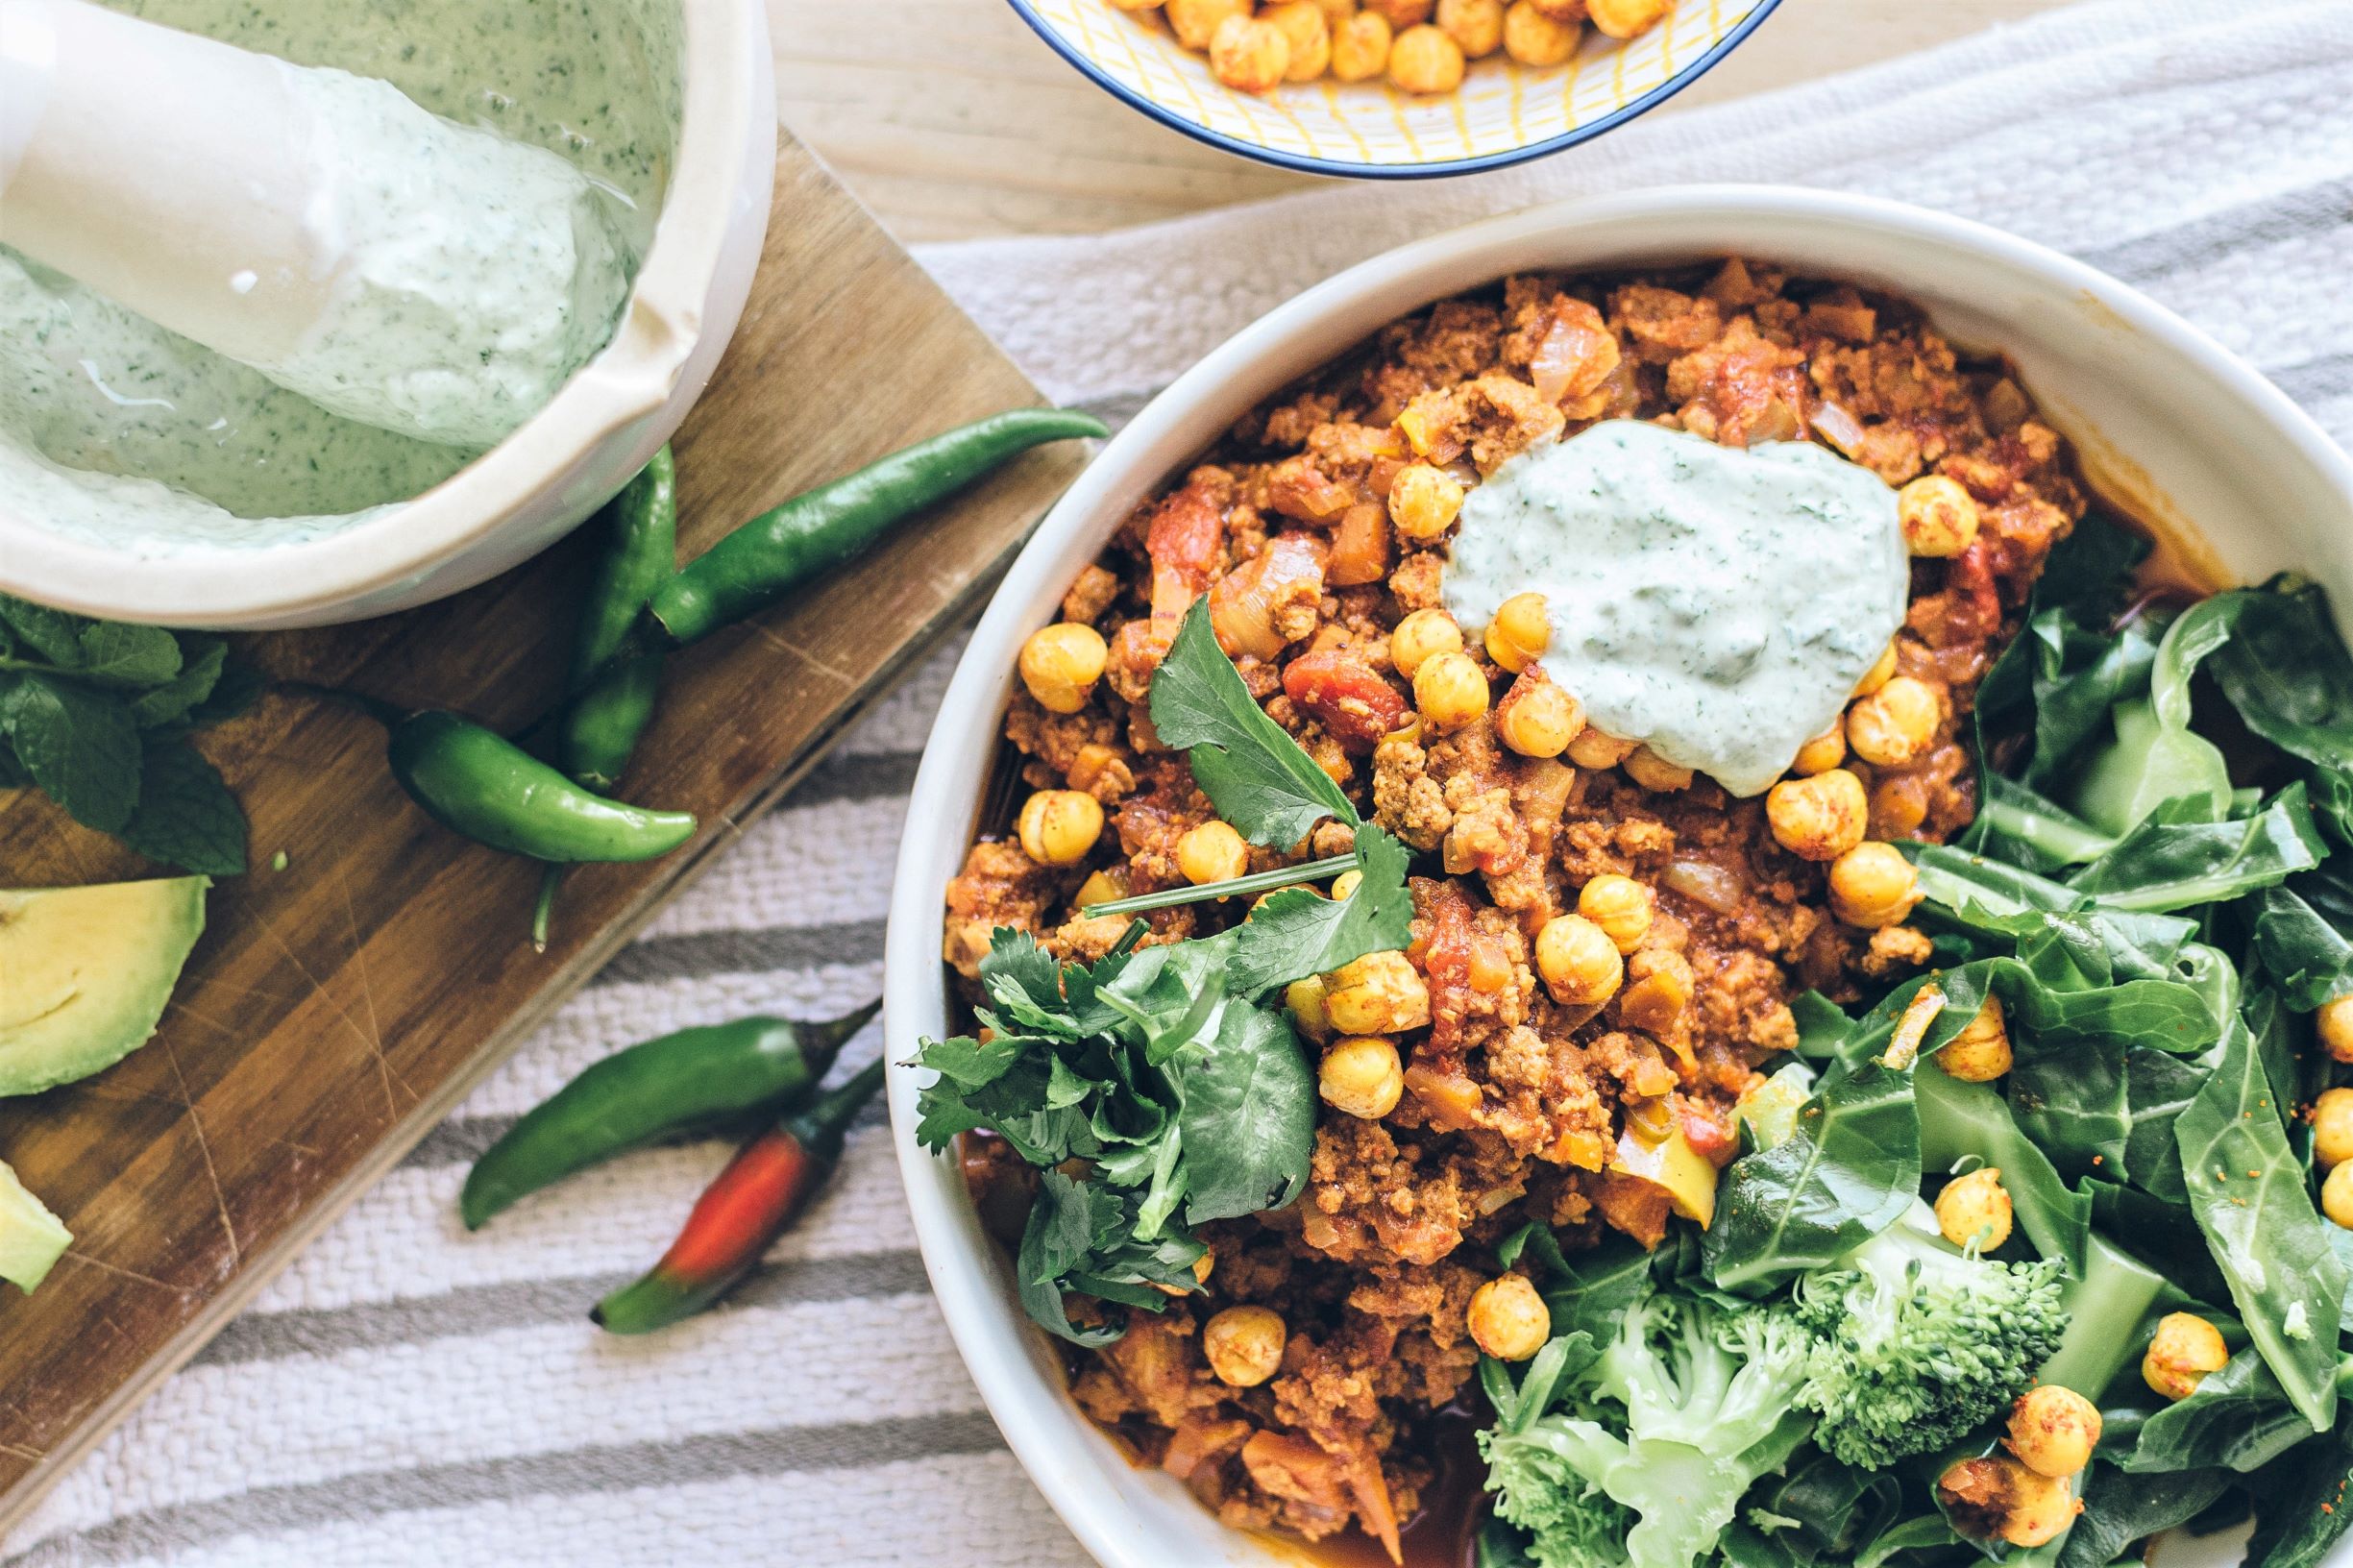 Grain bowl with chickpeas and protein.